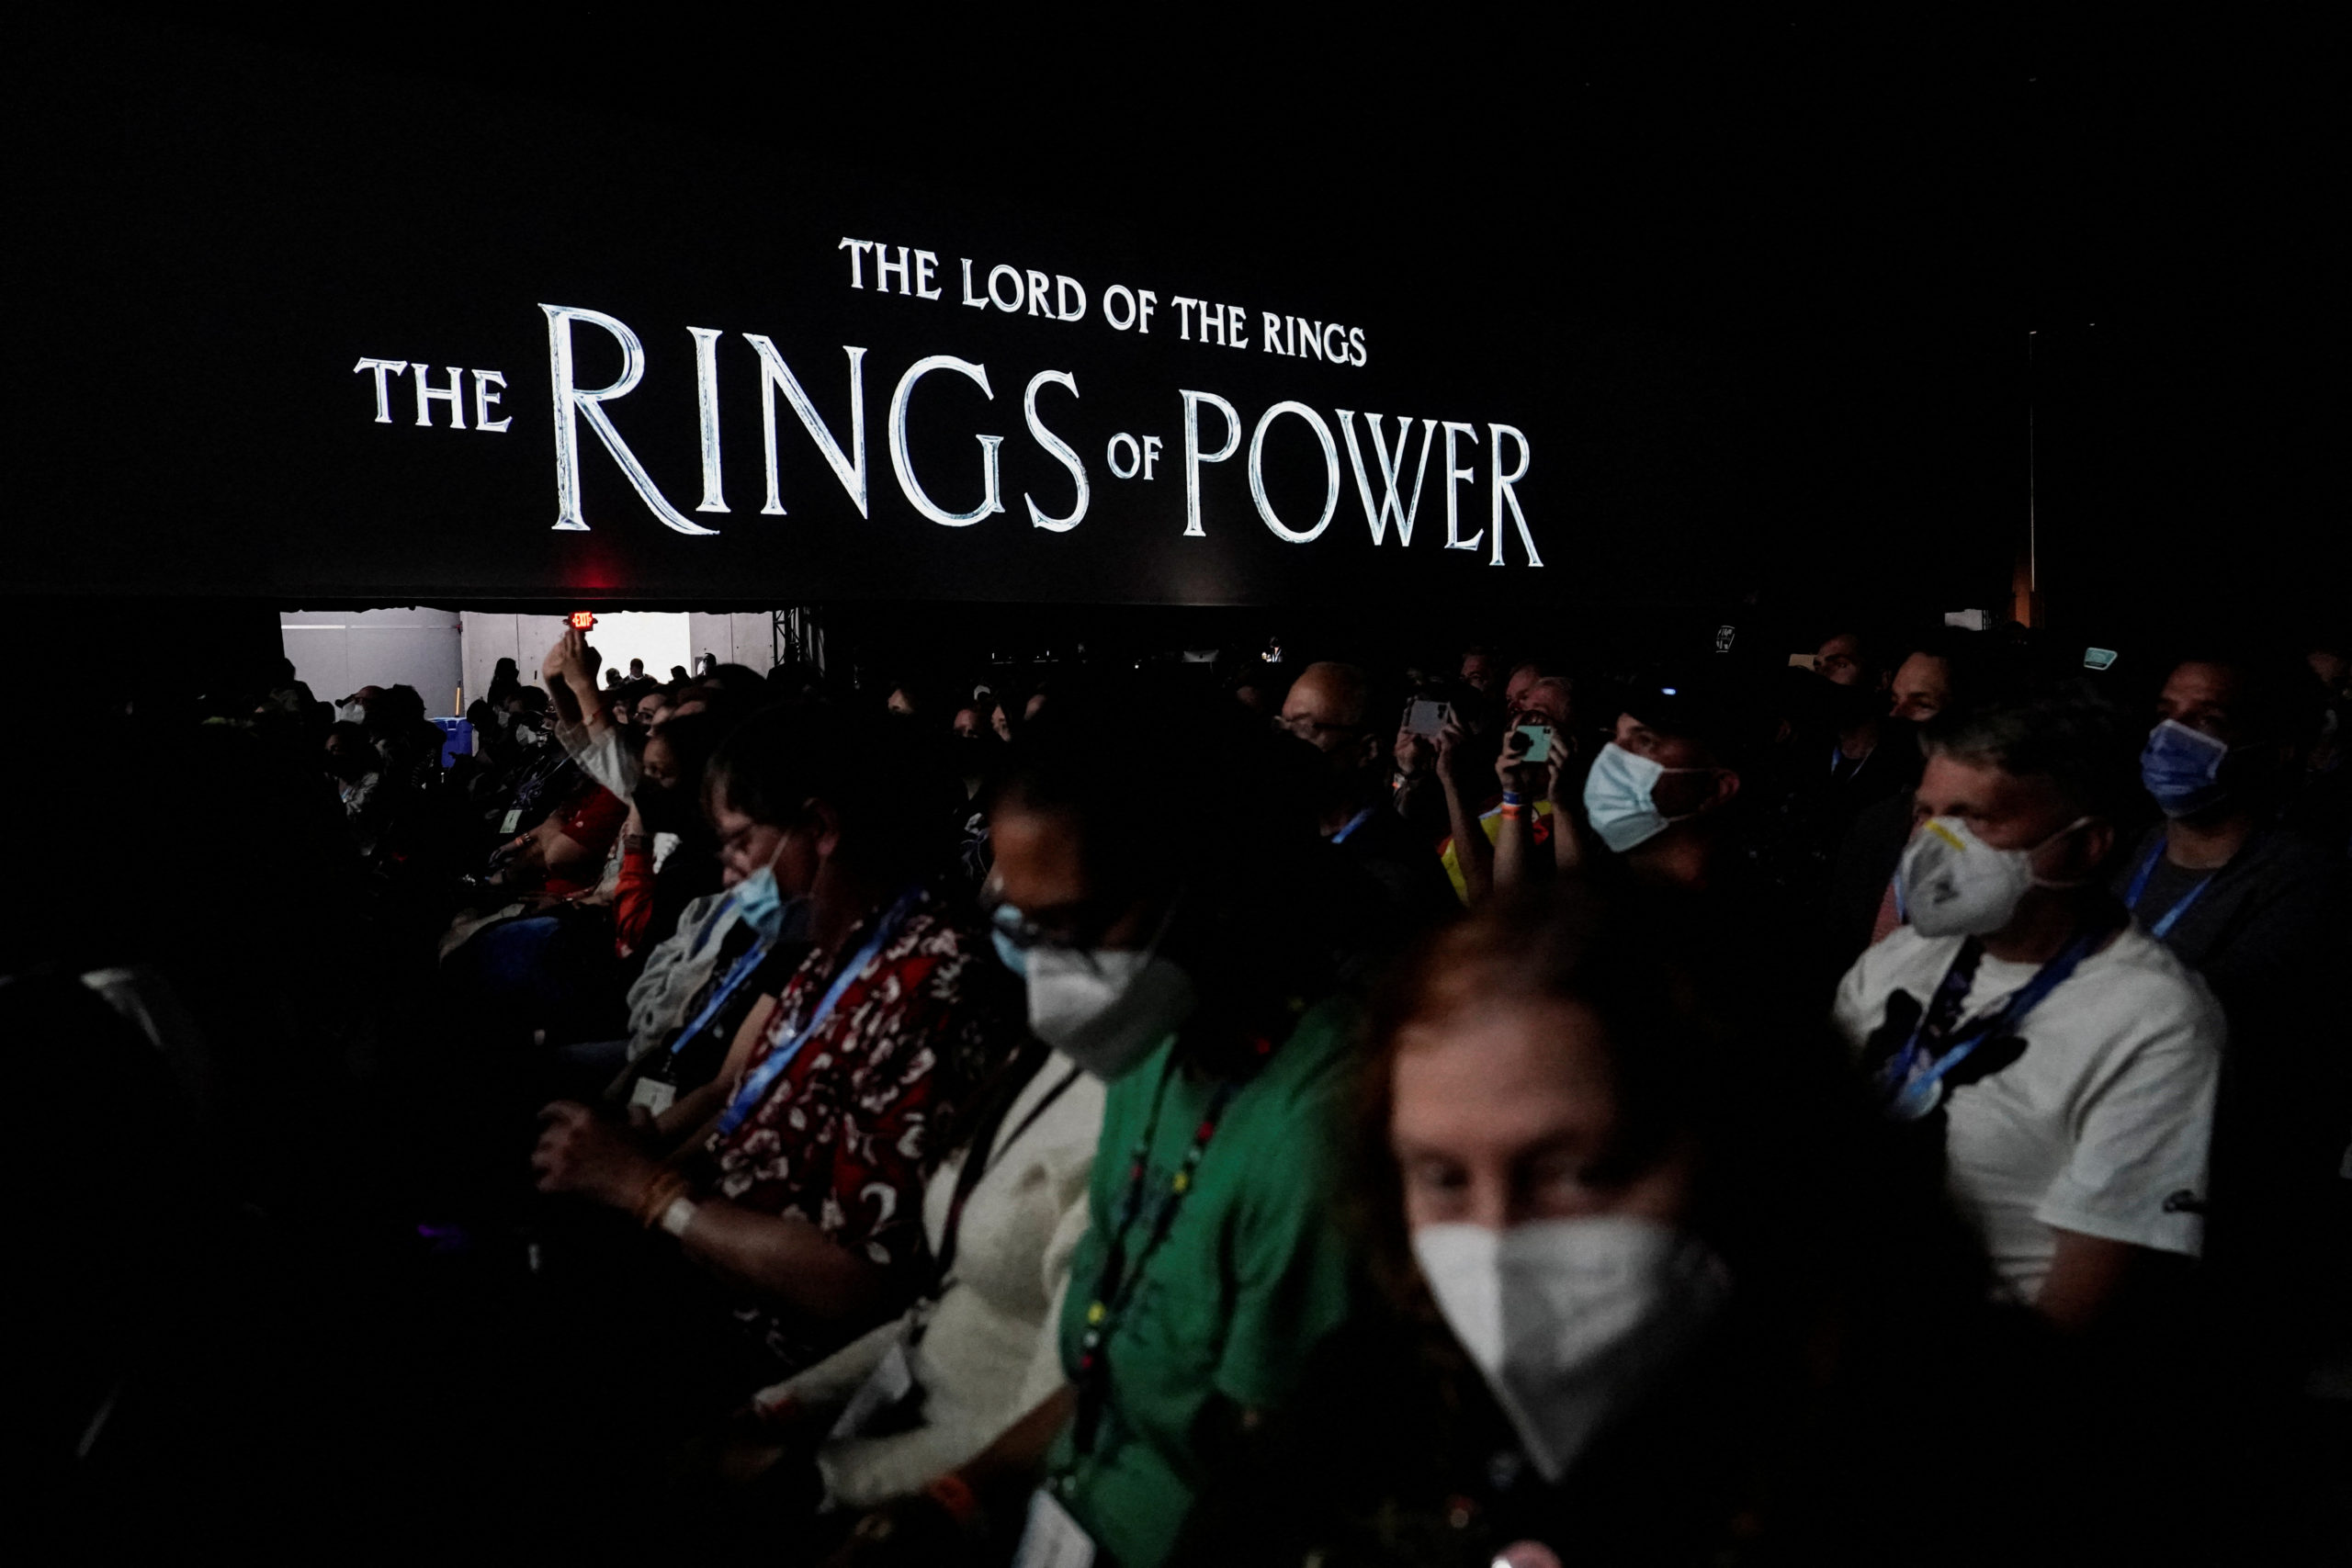 Fans listen to a panel introducing the Prime Video streaming series The Lord of the Rings: The Rings of Power at Comic-Con International in San Diego, California, U.S., July 22, 2022. REUTERS/Bing Guan